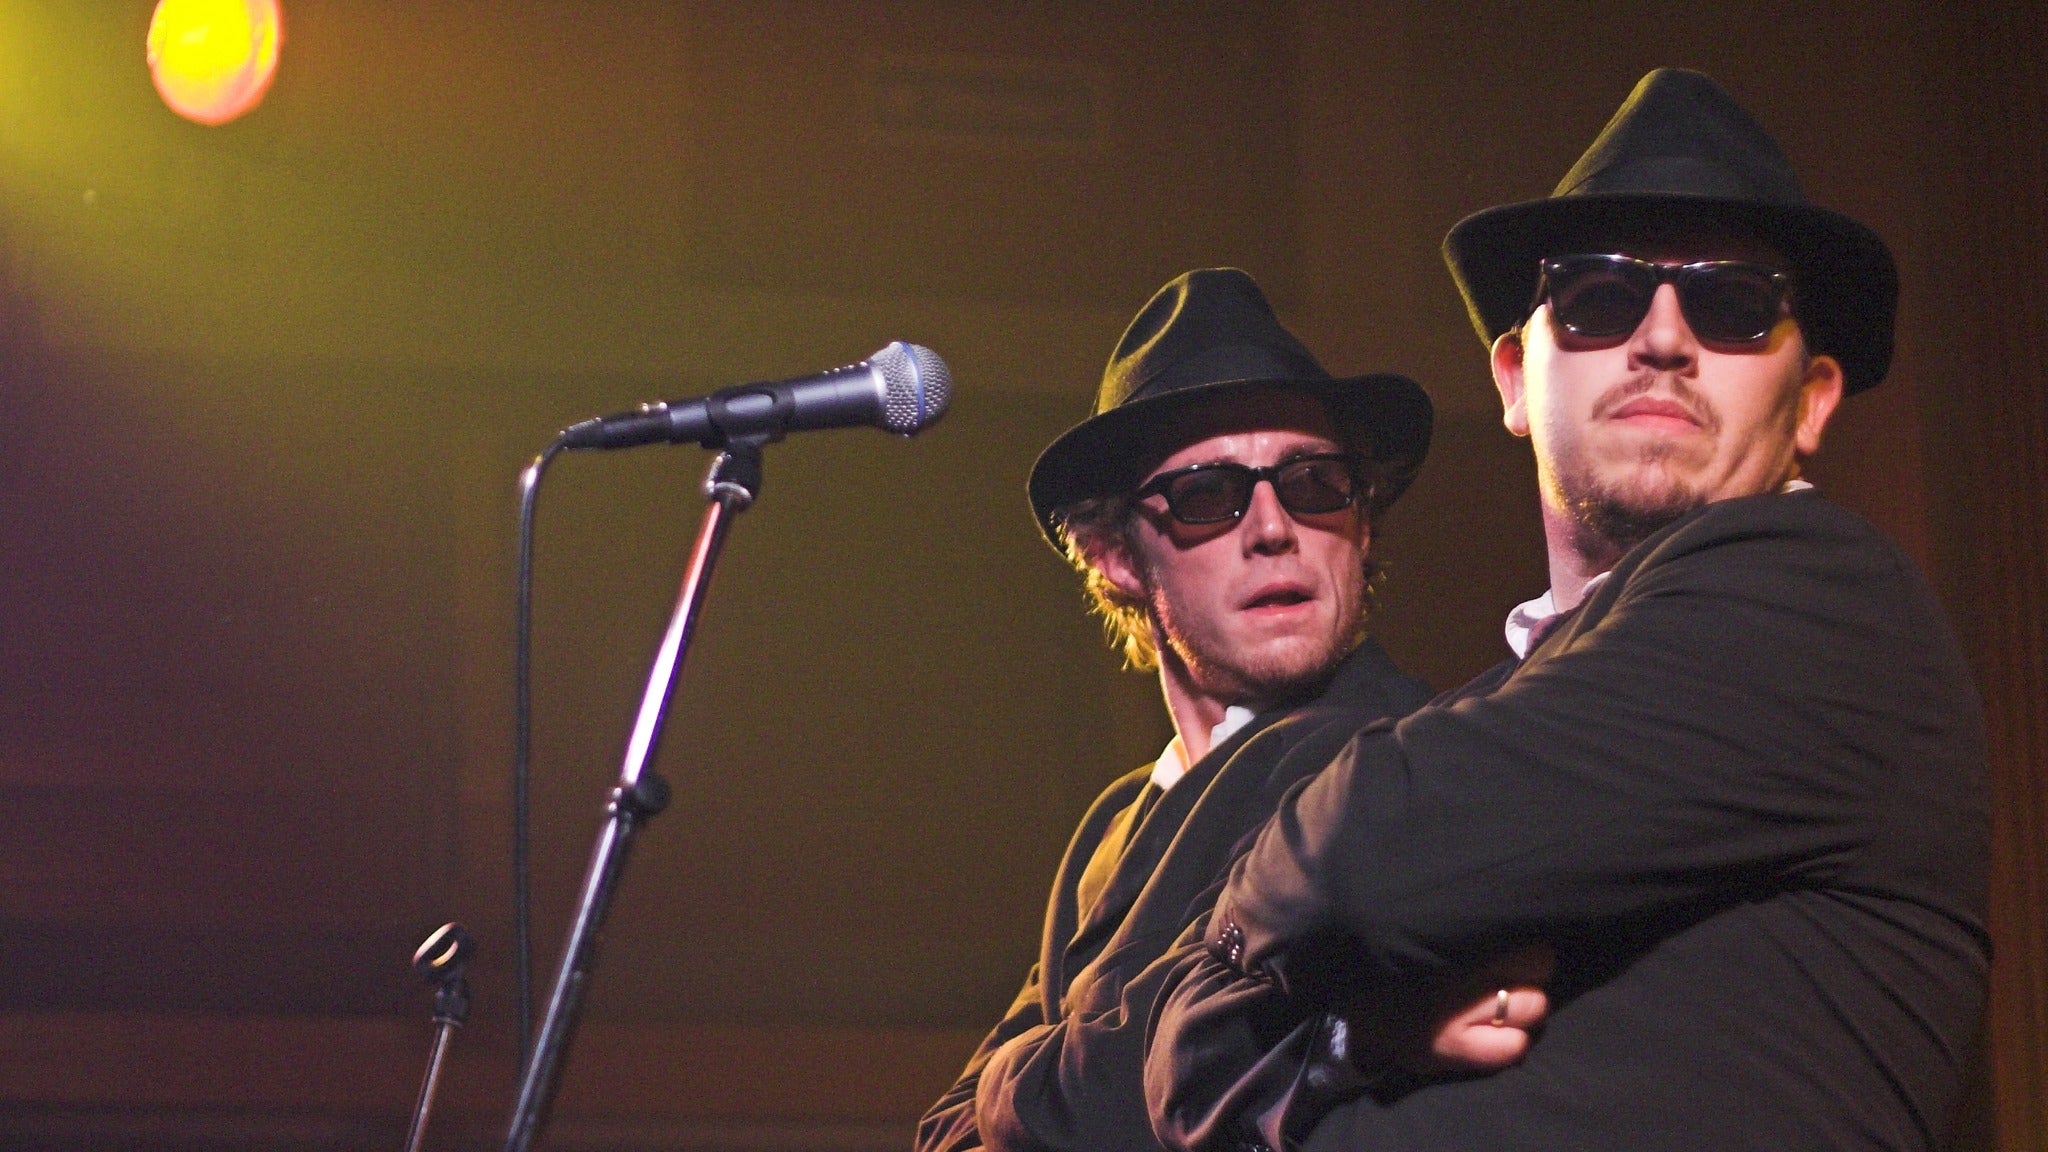 blues brothers tour 2022